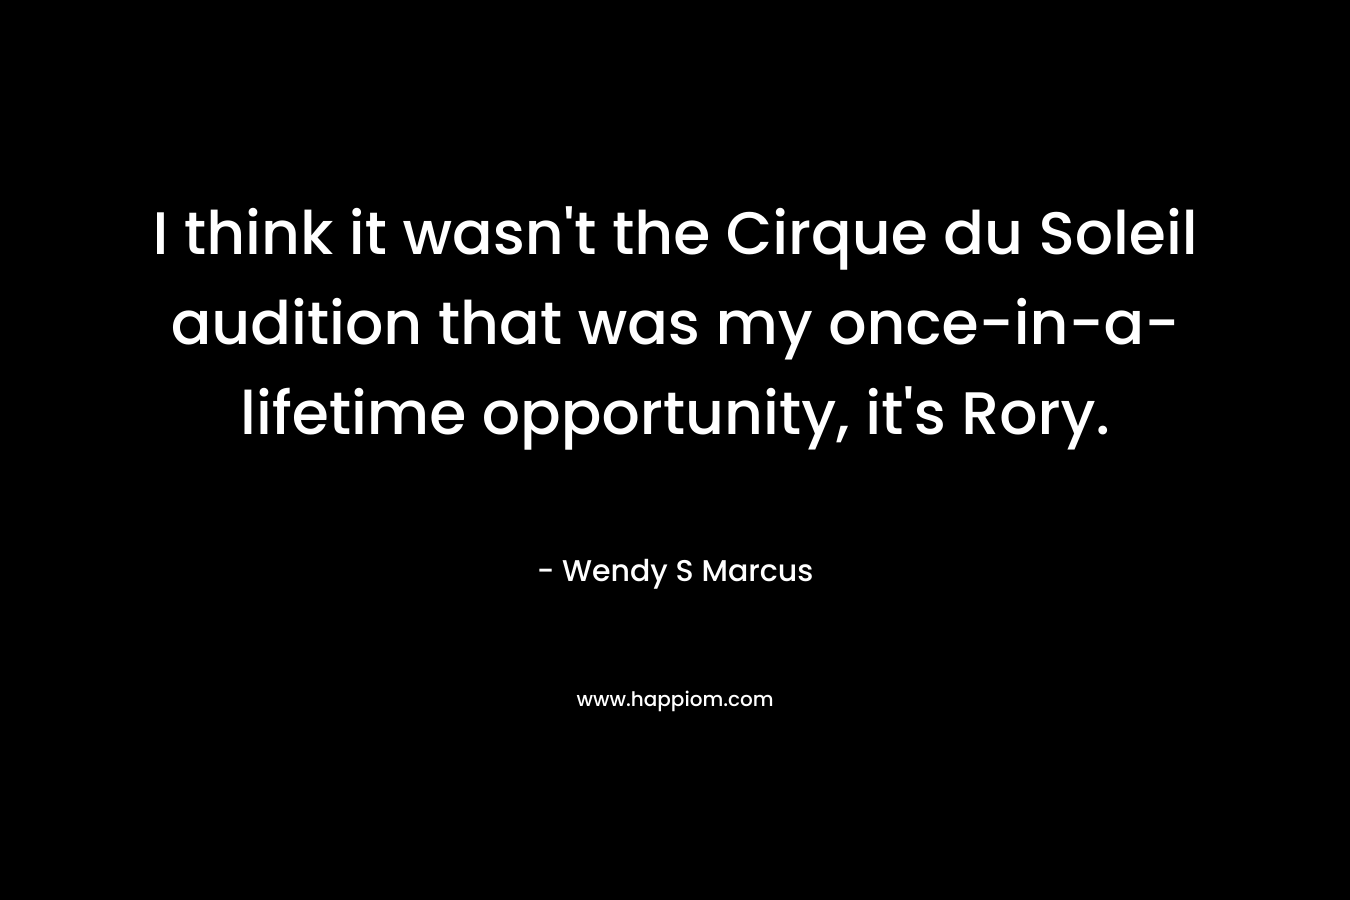 I think it wasn’t the Cirque du Soleil audition that was my once-in-a-lifetime opportunity, it’s Rory. – Wendy S Marcus